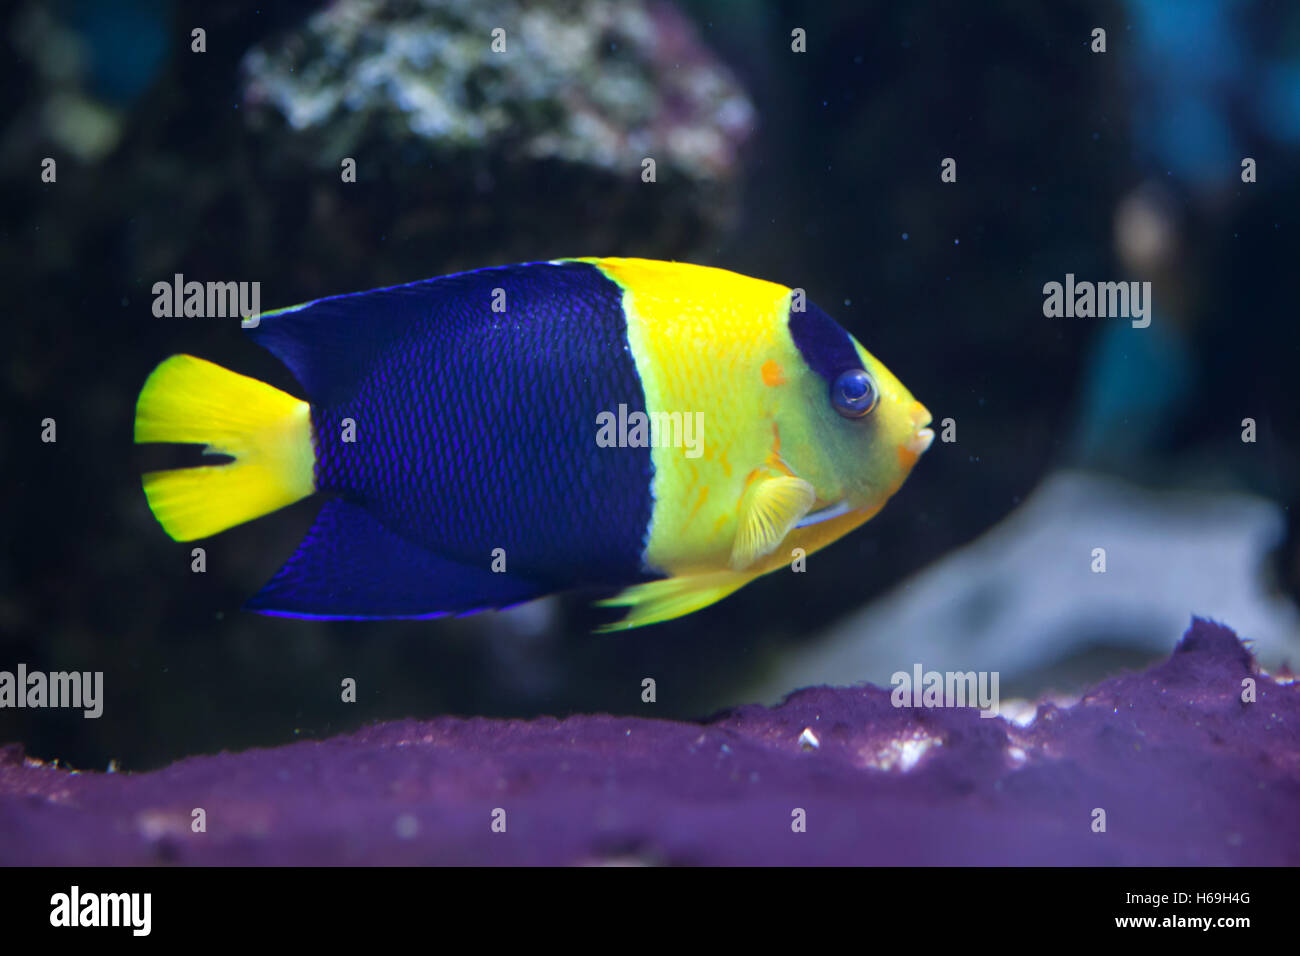 Bicolor angelfish (Centropyge bicolor), also known as the oriole angelfish. Wildlife animal. Stock Photo